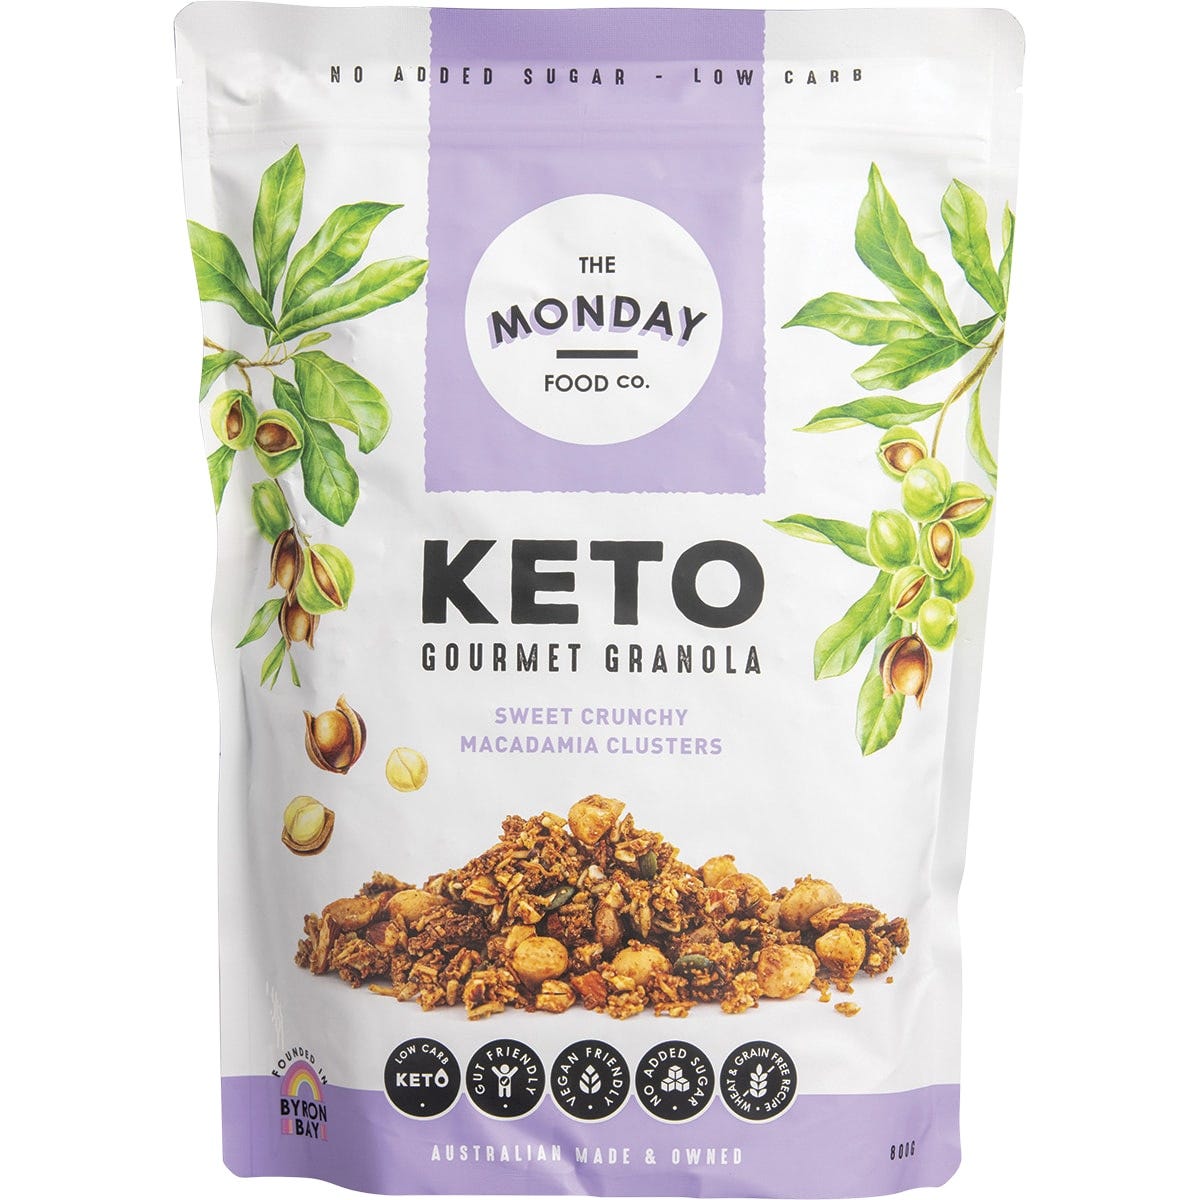 The Monday Food Co. Keto Gourmet Granola Sweet Crunchy Macadamia Clusters 800g - Dr Earth - Breakfast